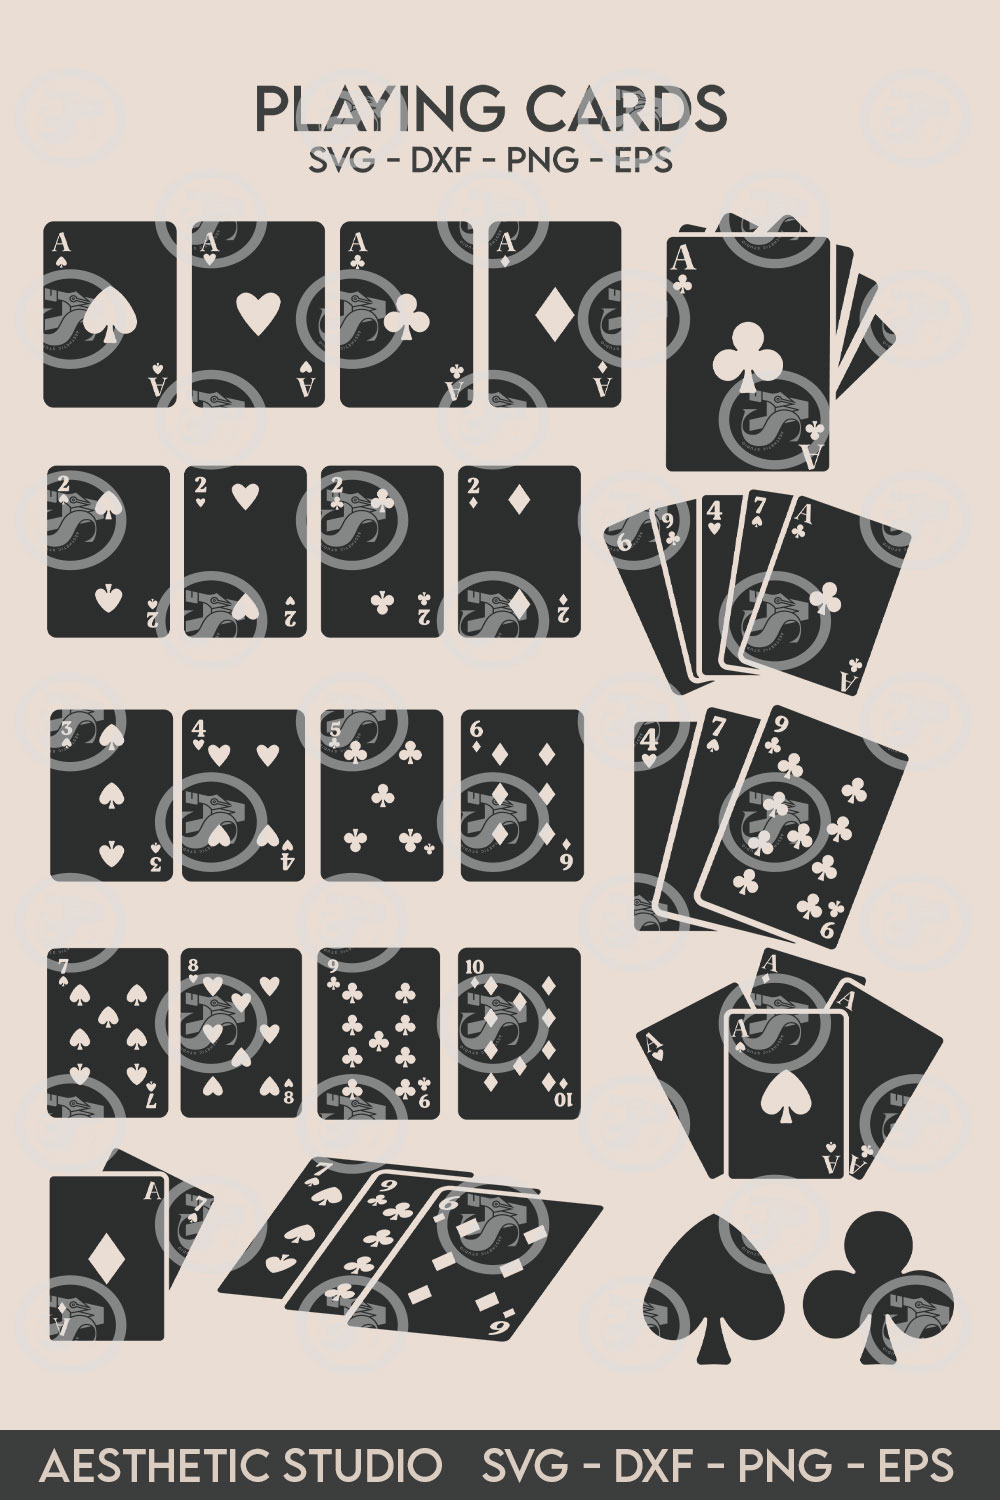 Playing Cards Svg, Cards Silhouette, Full Deck Playing Cards, Aces Svg, Poker Cards Svg, Royal Flush, Royal Flush Svg, Playing Cards Silhouette, Hearts Svg, Spades Svg, Clubs, Diamonds, Vector, Clipart pinterest preview image.